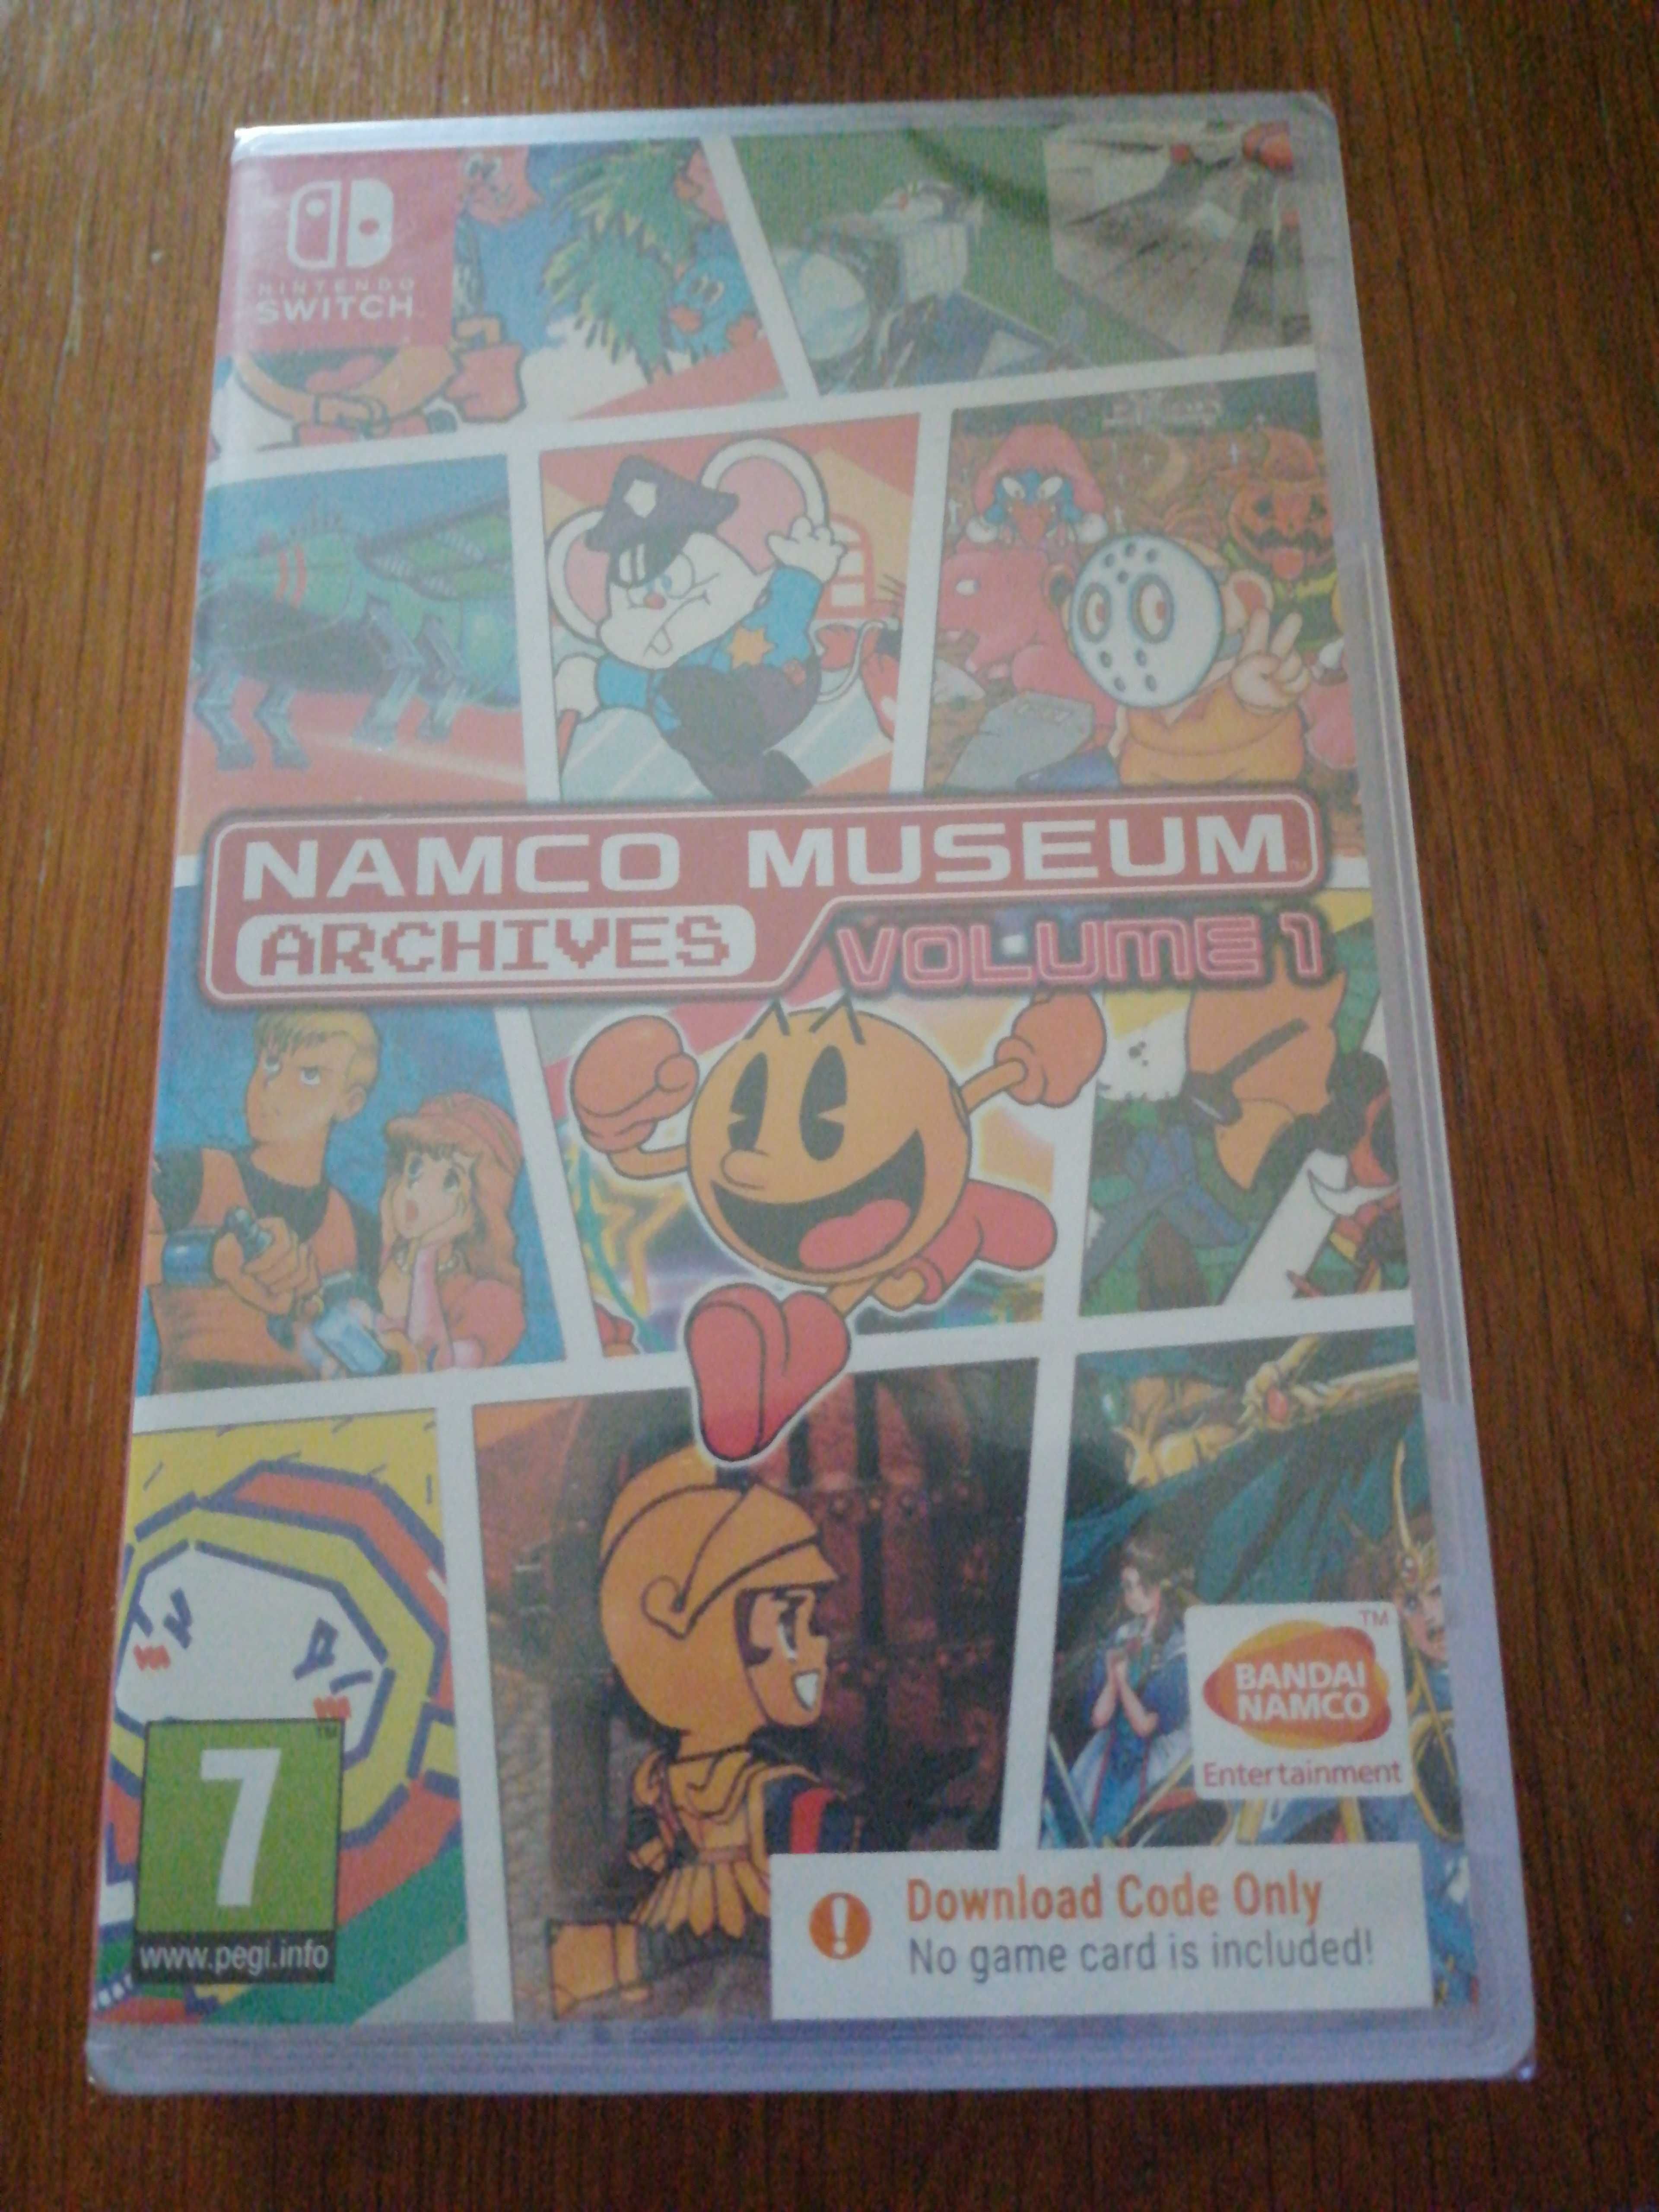 Namco Museum Archives Volume 1 - cod download (Nintendo Switch)